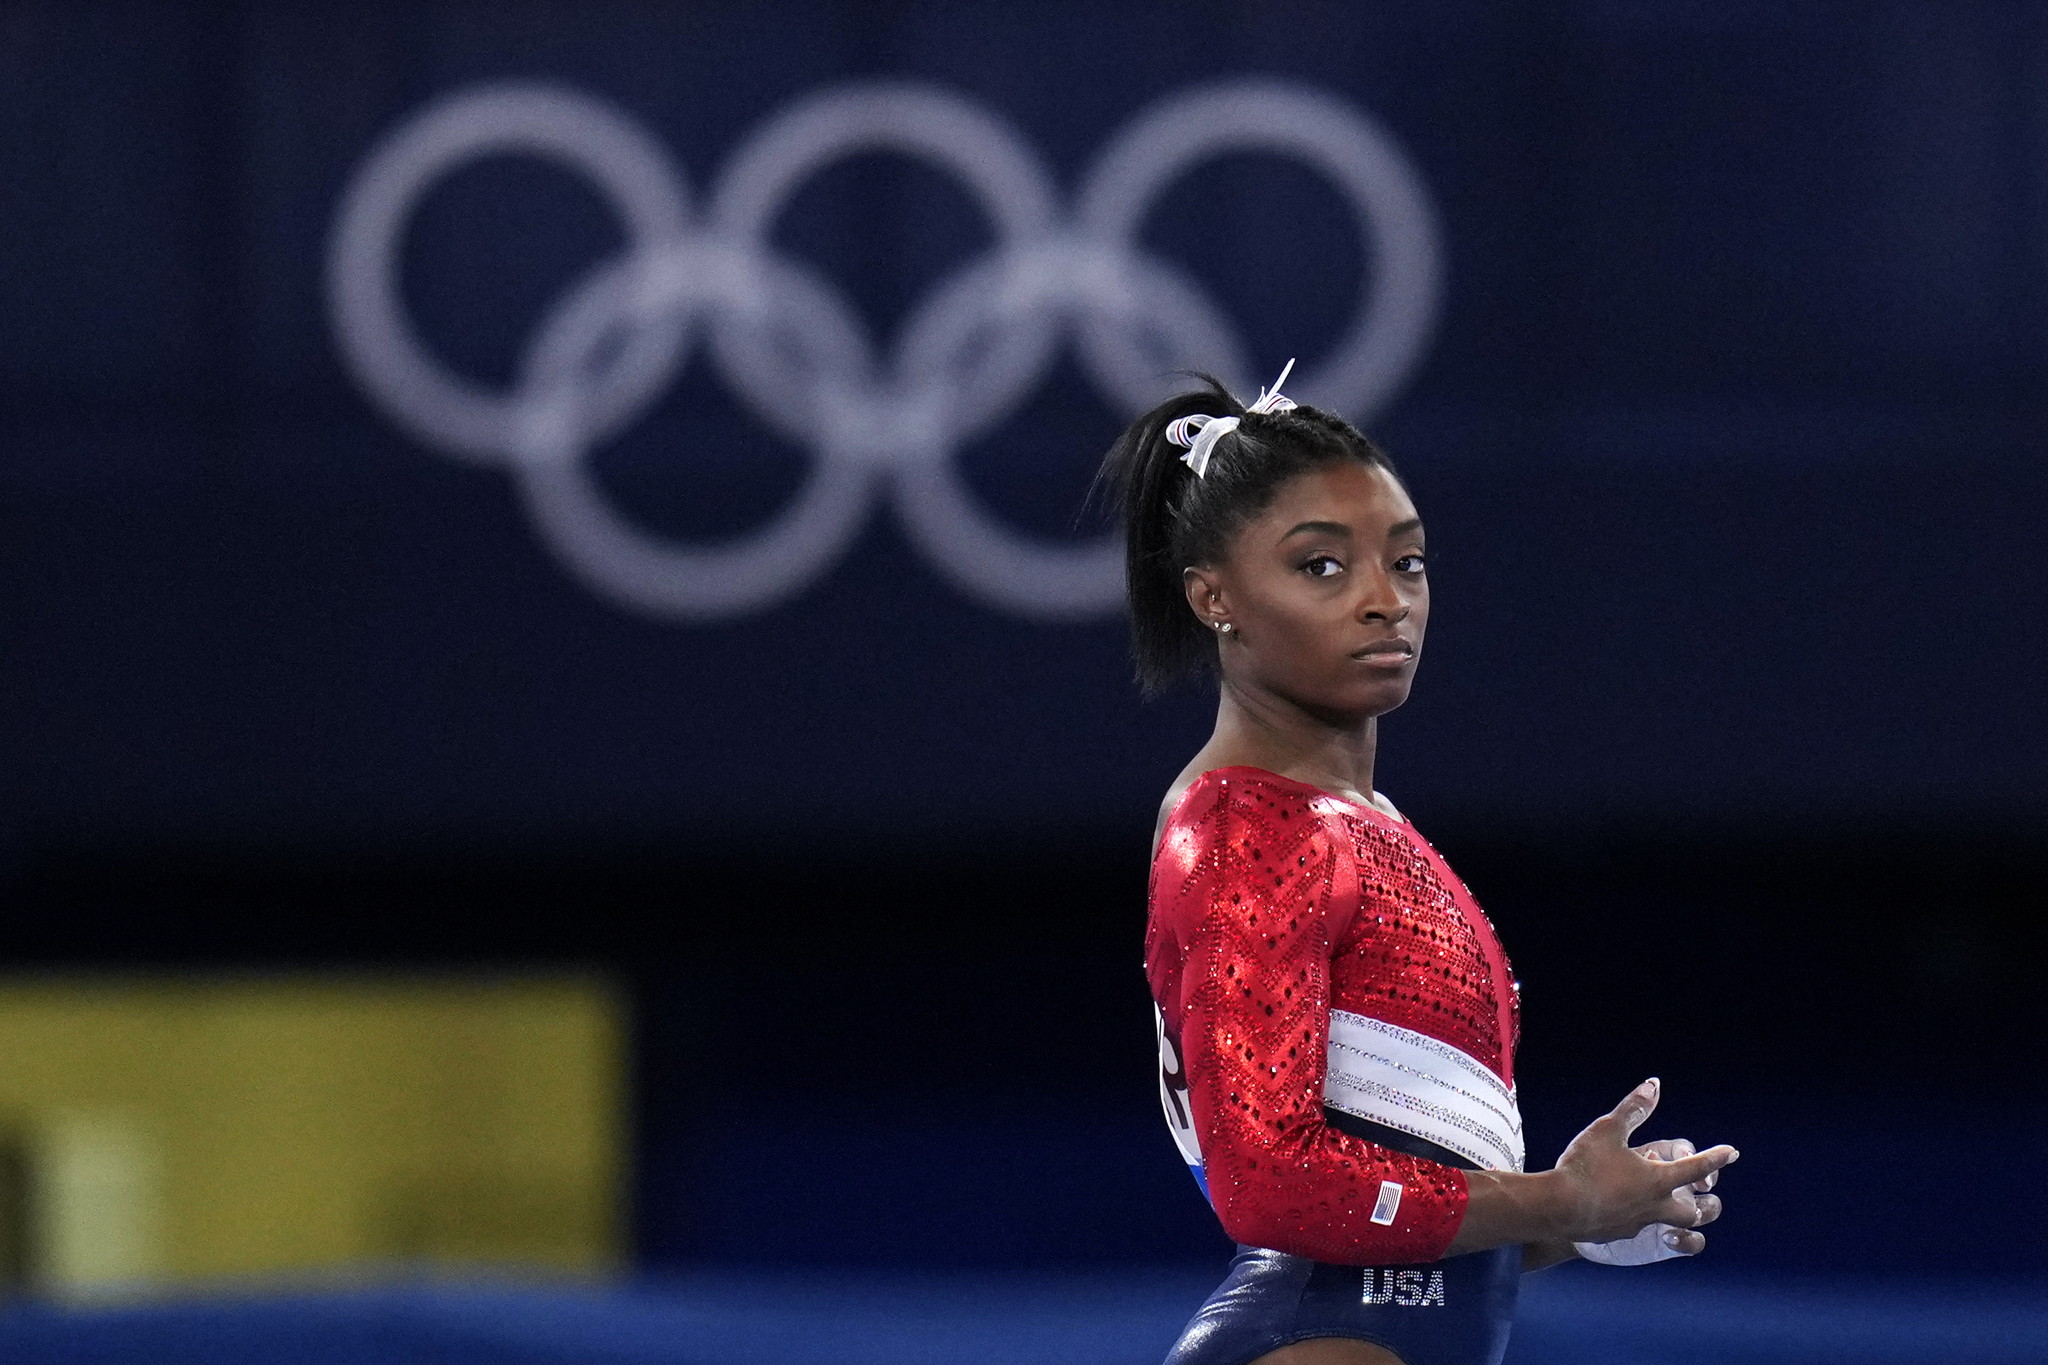 File-This July 27, 2021, file photo shows Simone lt;HIT gt;Biles lt;/HIT gt;, of the United States, waiting to perform on the vault during the artistic gymnastics women's final at the 2020 Summer Olympics, Tuesday, July 27, 2021, in Tokyo. lt;HIT gt;Biles lt;/HIT gt;' sponsors including Athleta and Visa are lauding her decision to put her mental health first and withdraw from the gymnastics team competition during the Olympics. It's the latest example of sponsors praising athletes who are increasingly open about mental health issues. (AP Photo/Gregory Bull, File)